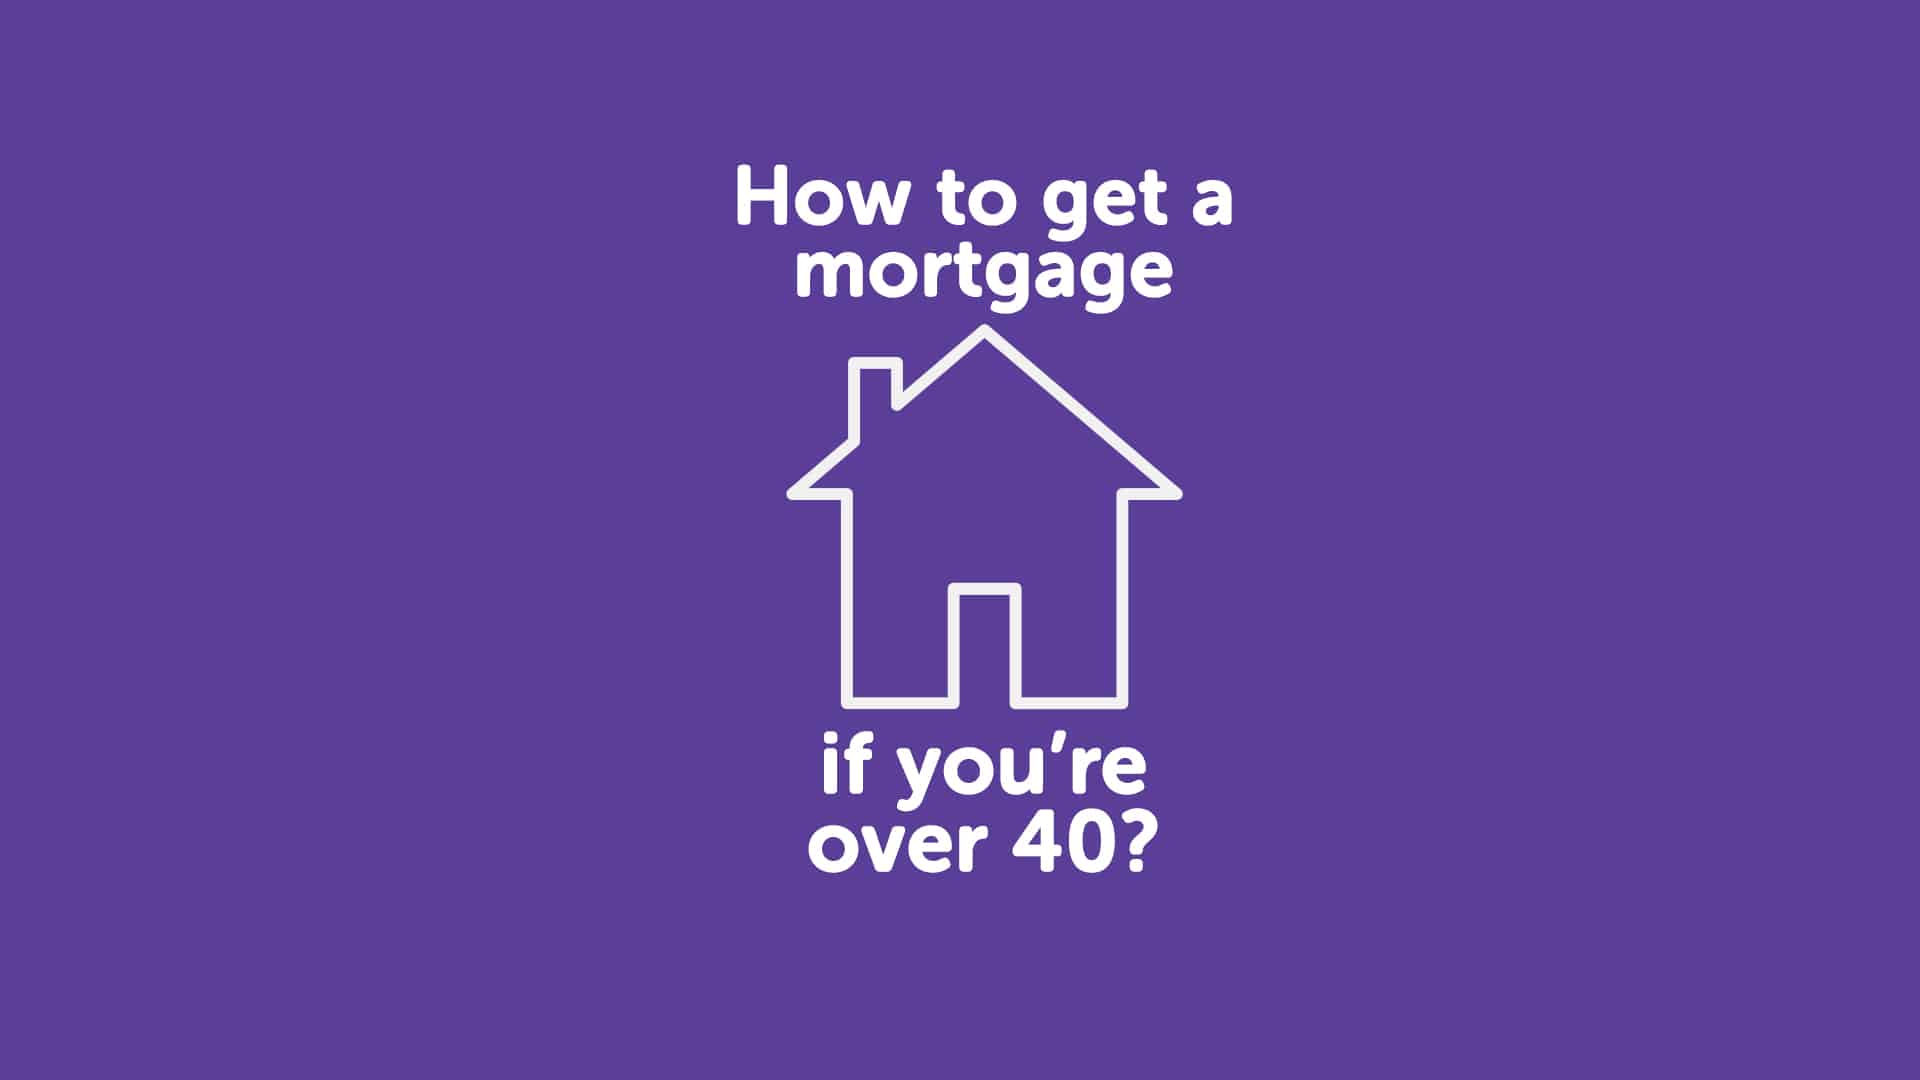 How to Get a Mortgage in Manchester if You're Over 40